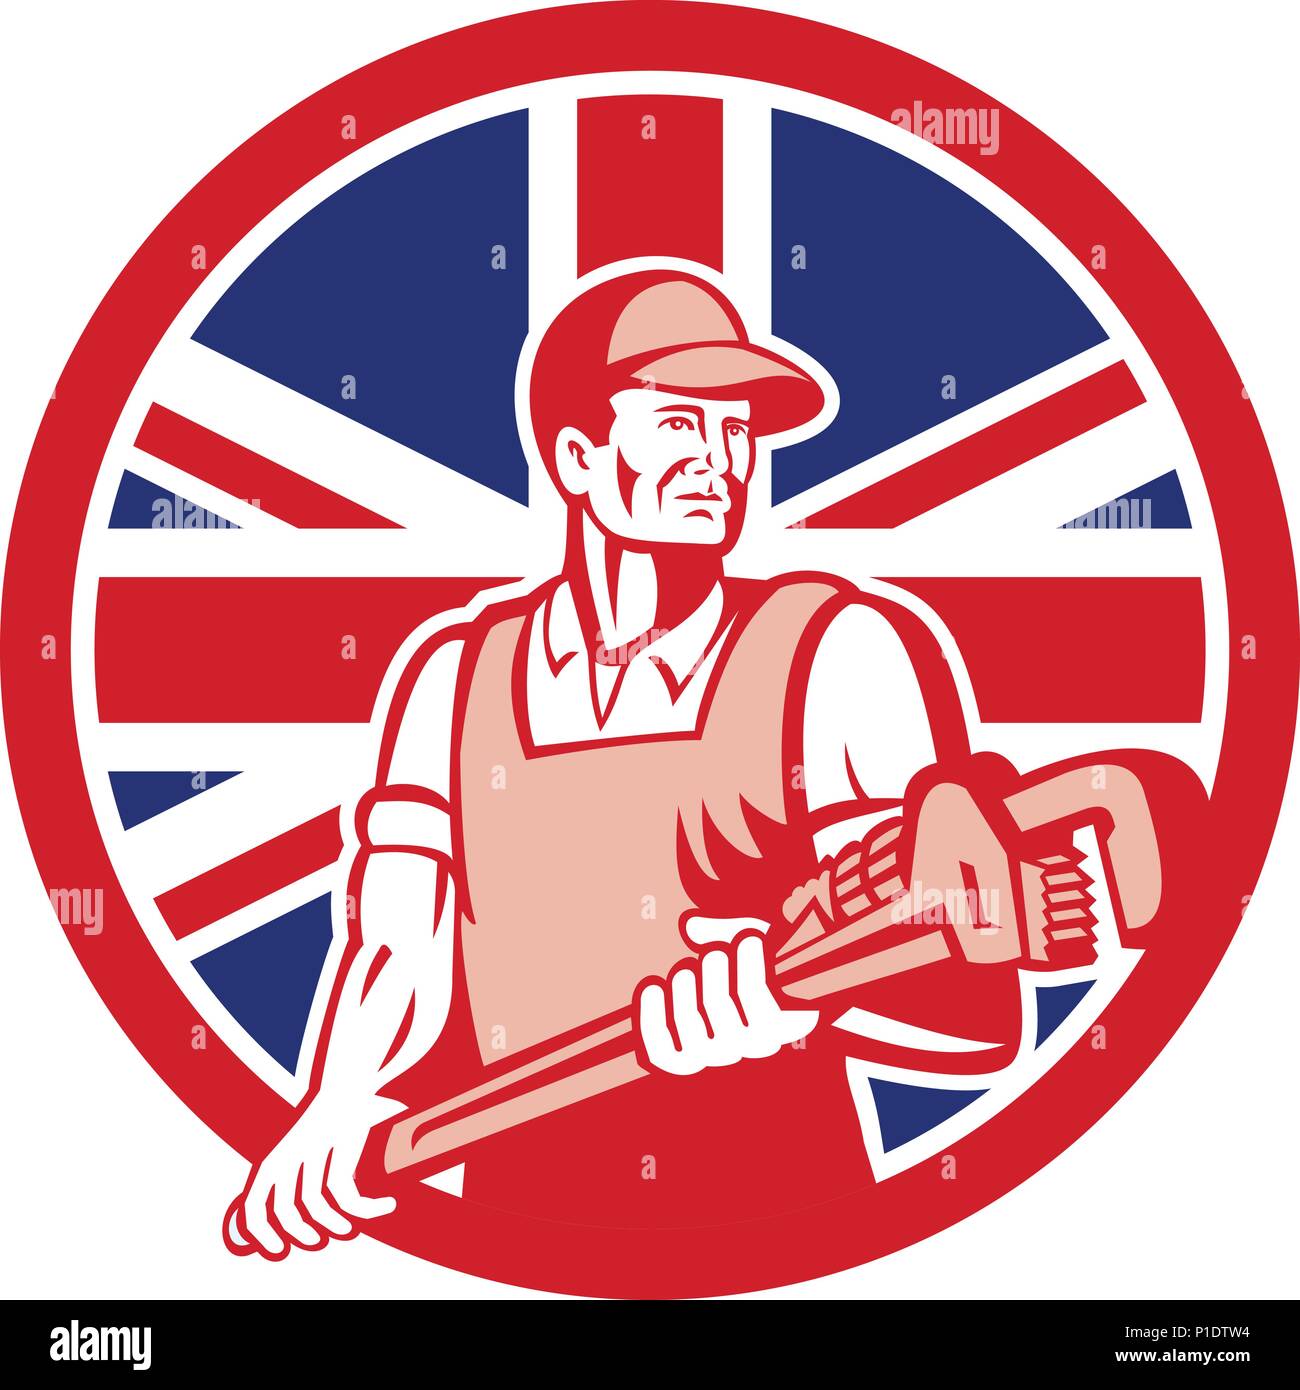 Icon retro style illustration of a British plumber and gasfitter holding monkey wrench with United Kingdom UK, Great Britain Union Jack flag set insid Stock Vector